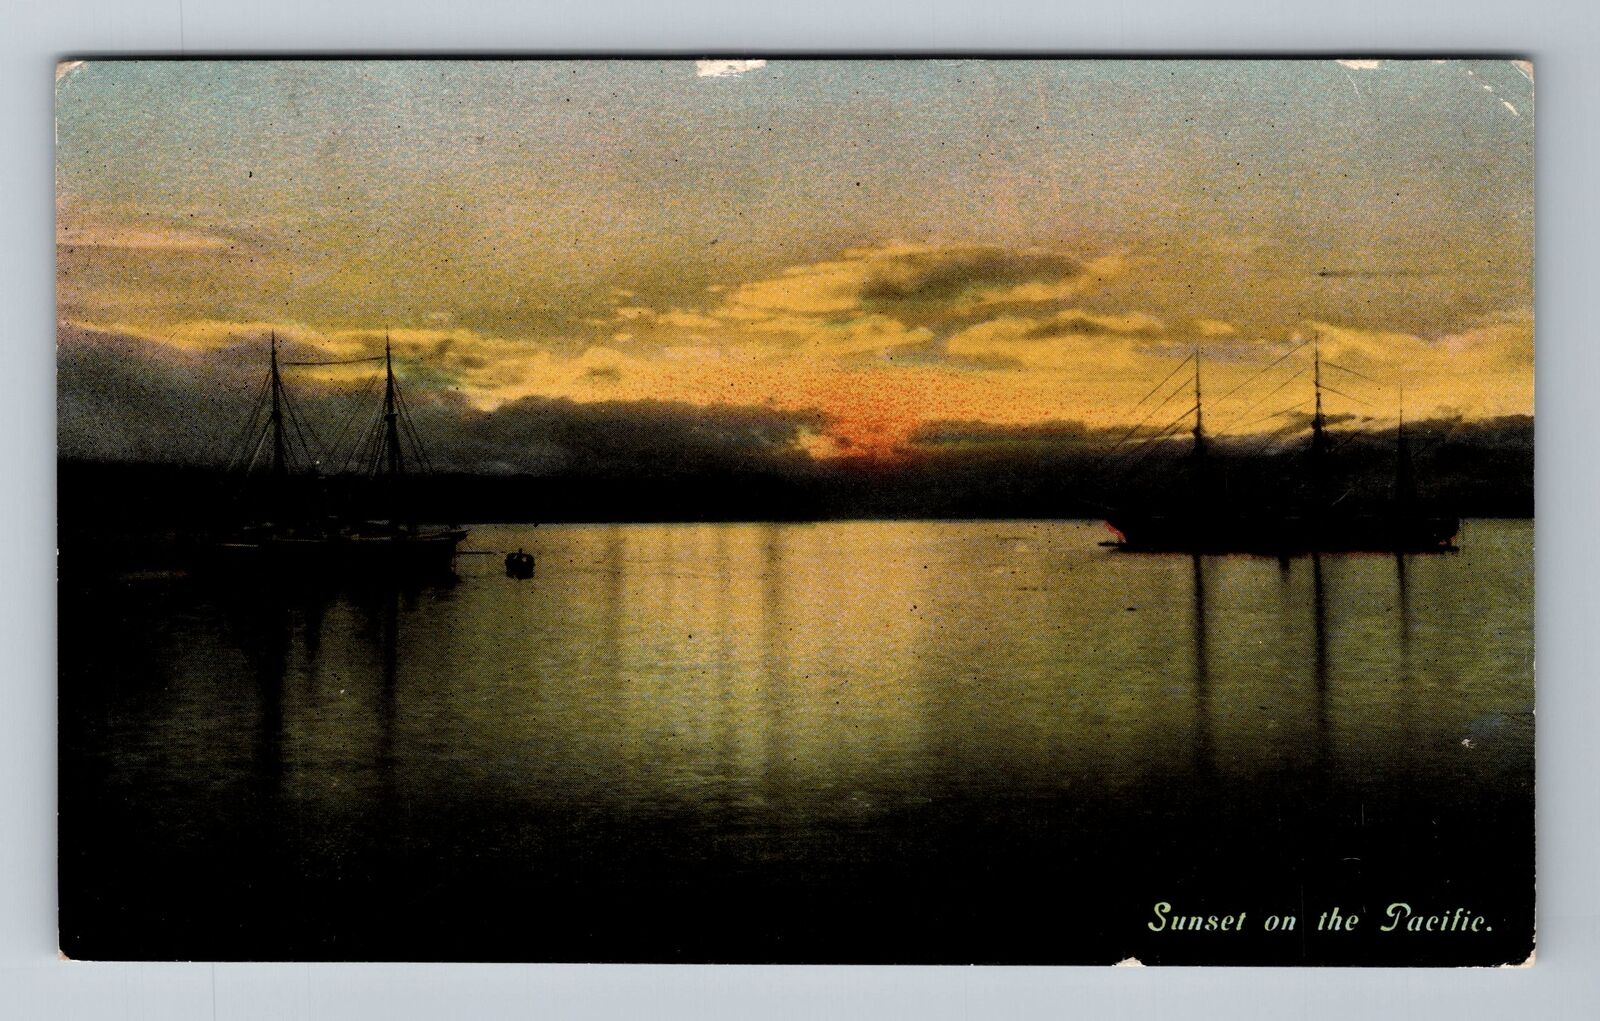 CA-California, Sunset on the Pacific, Ships, c1916, Vintage Postcard